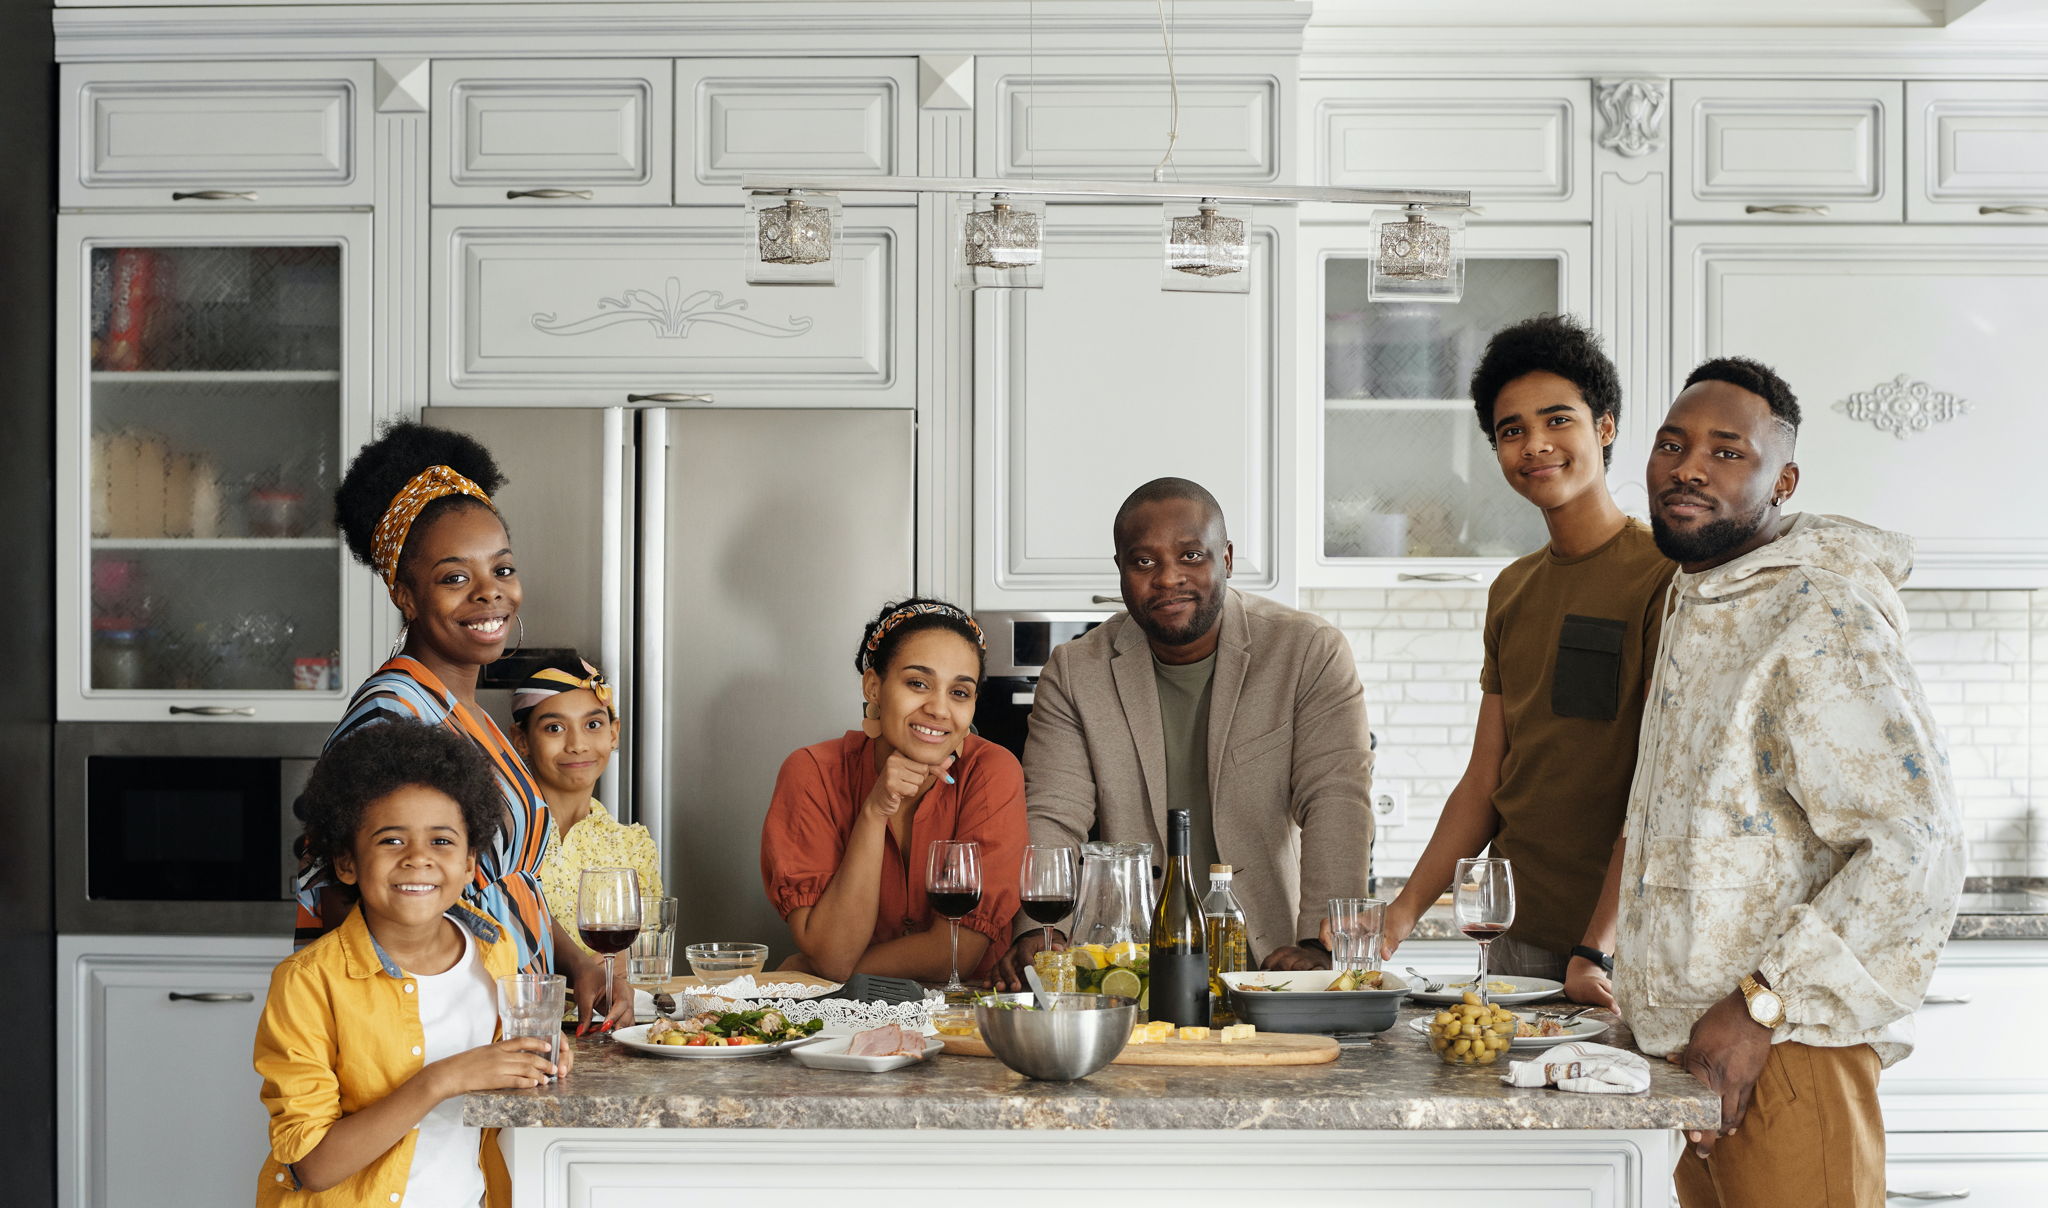 A diverse family of 7 gather around a table getting ready for a holiday dinner